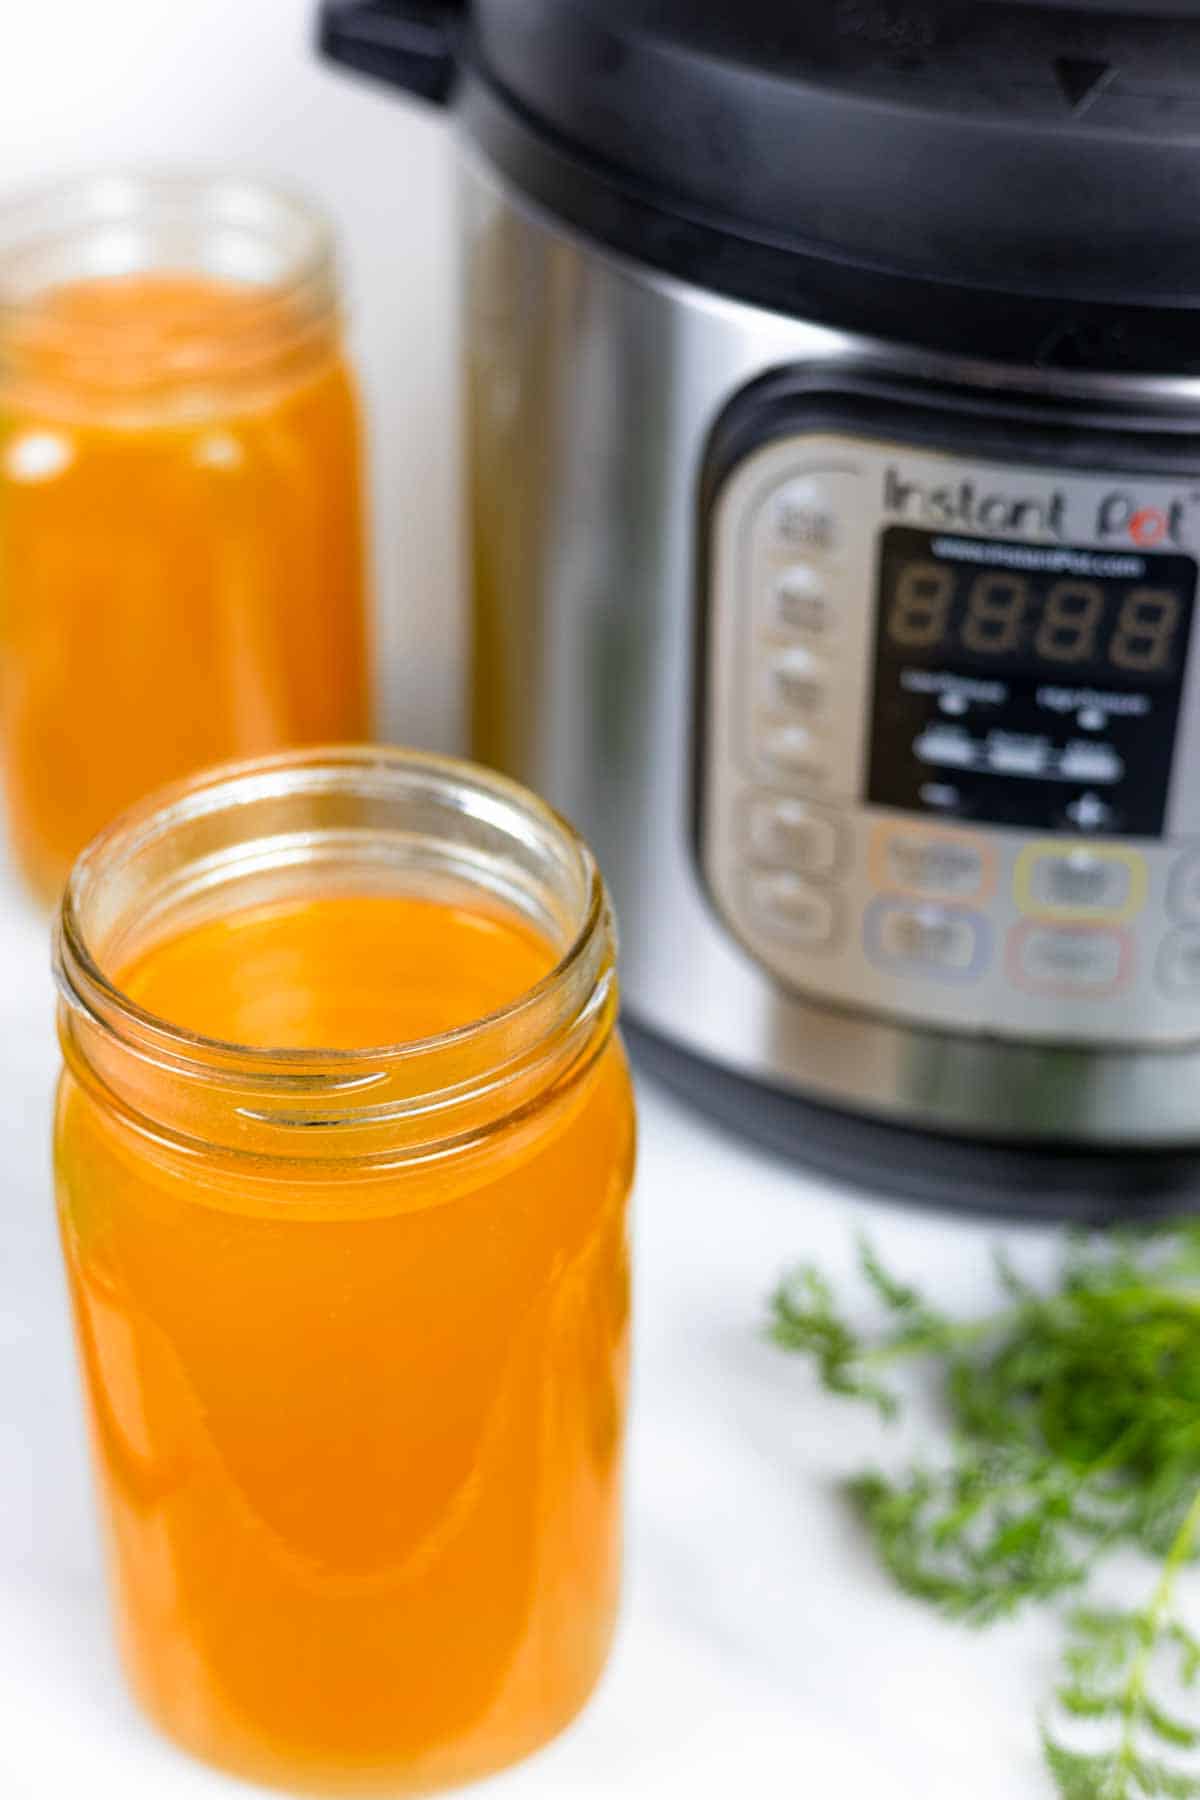 Quart jars of chicken broth on a white board in front of an Instant Pot with herbs sprinkled in front.